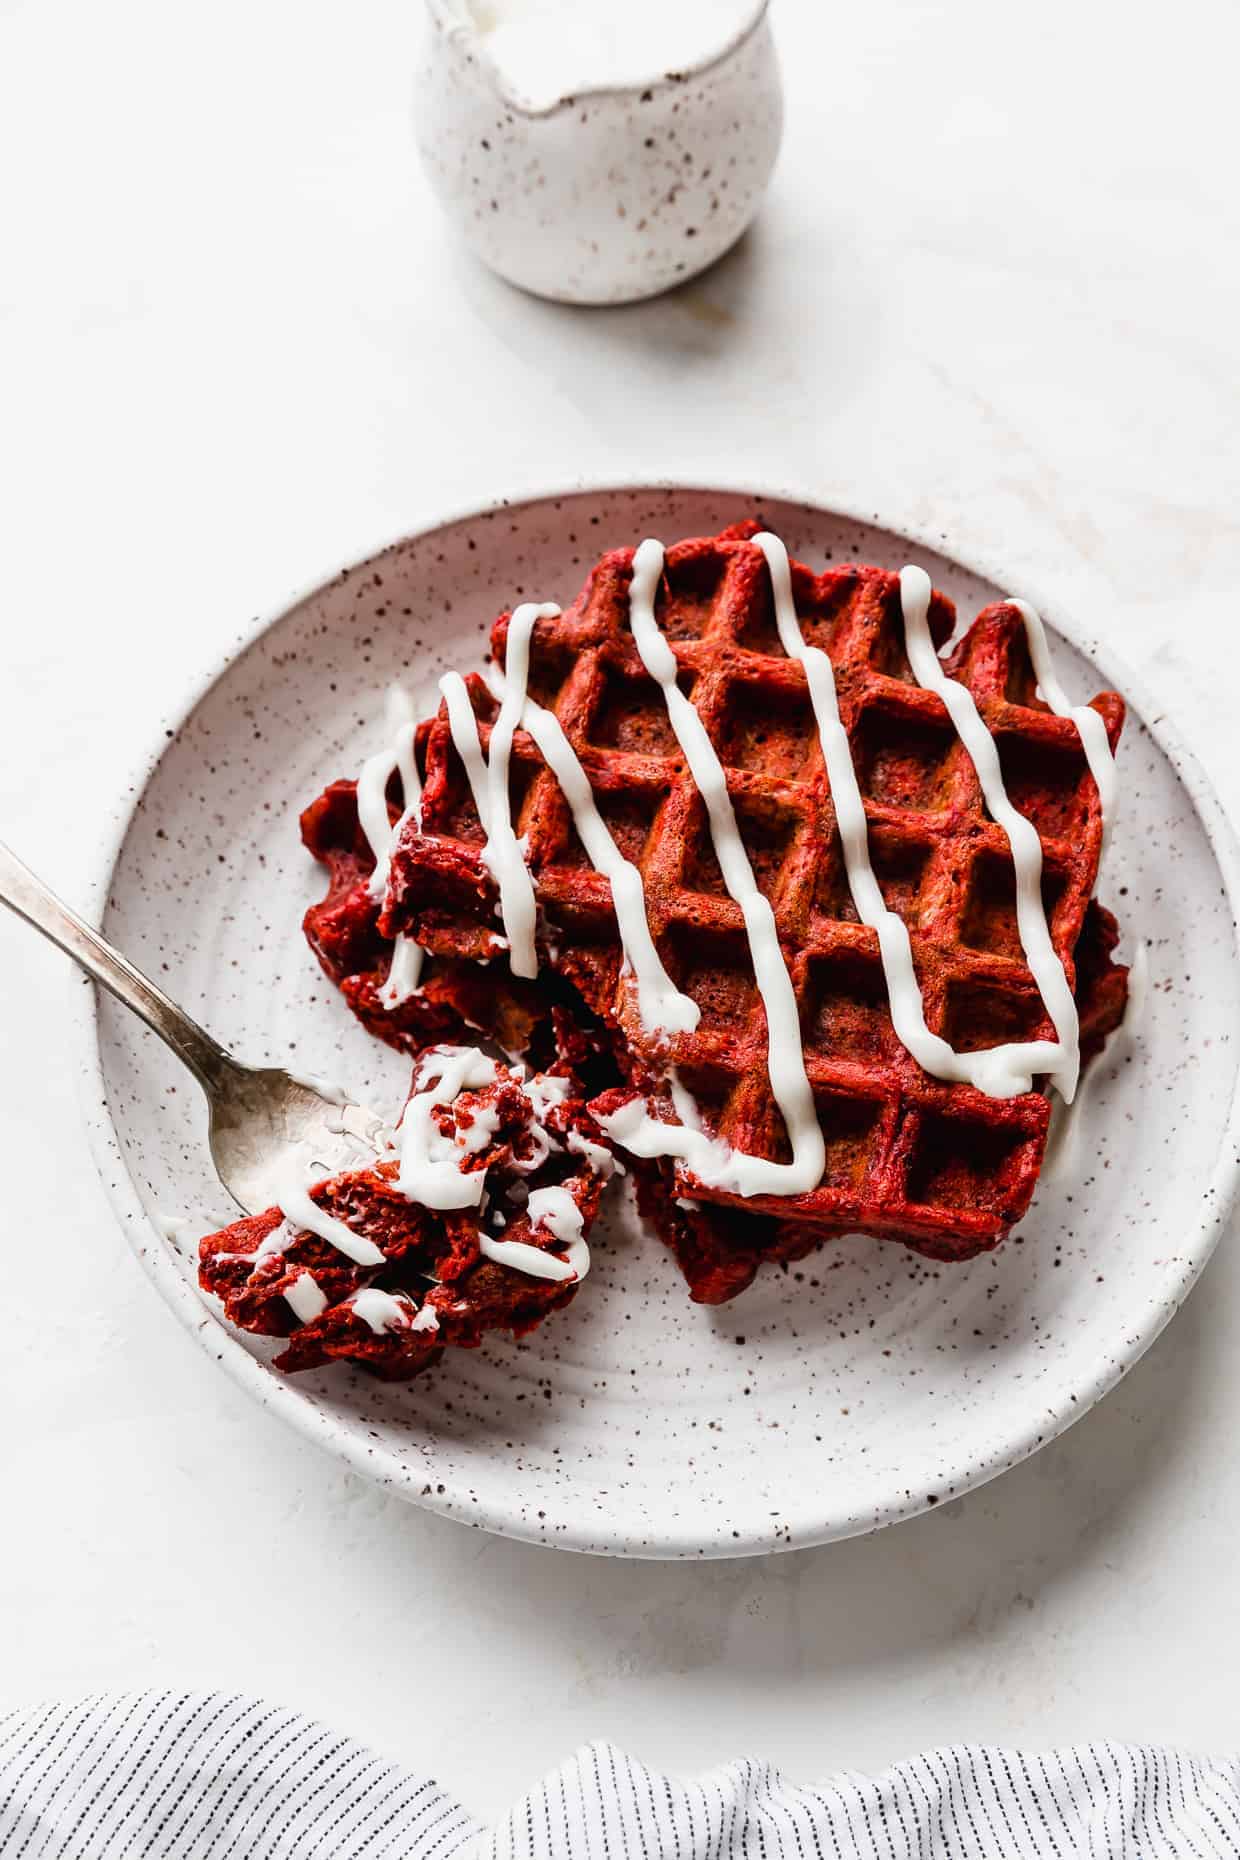 Two red velvet waffles drizzled with a white glaze on a white plate, against a white background.